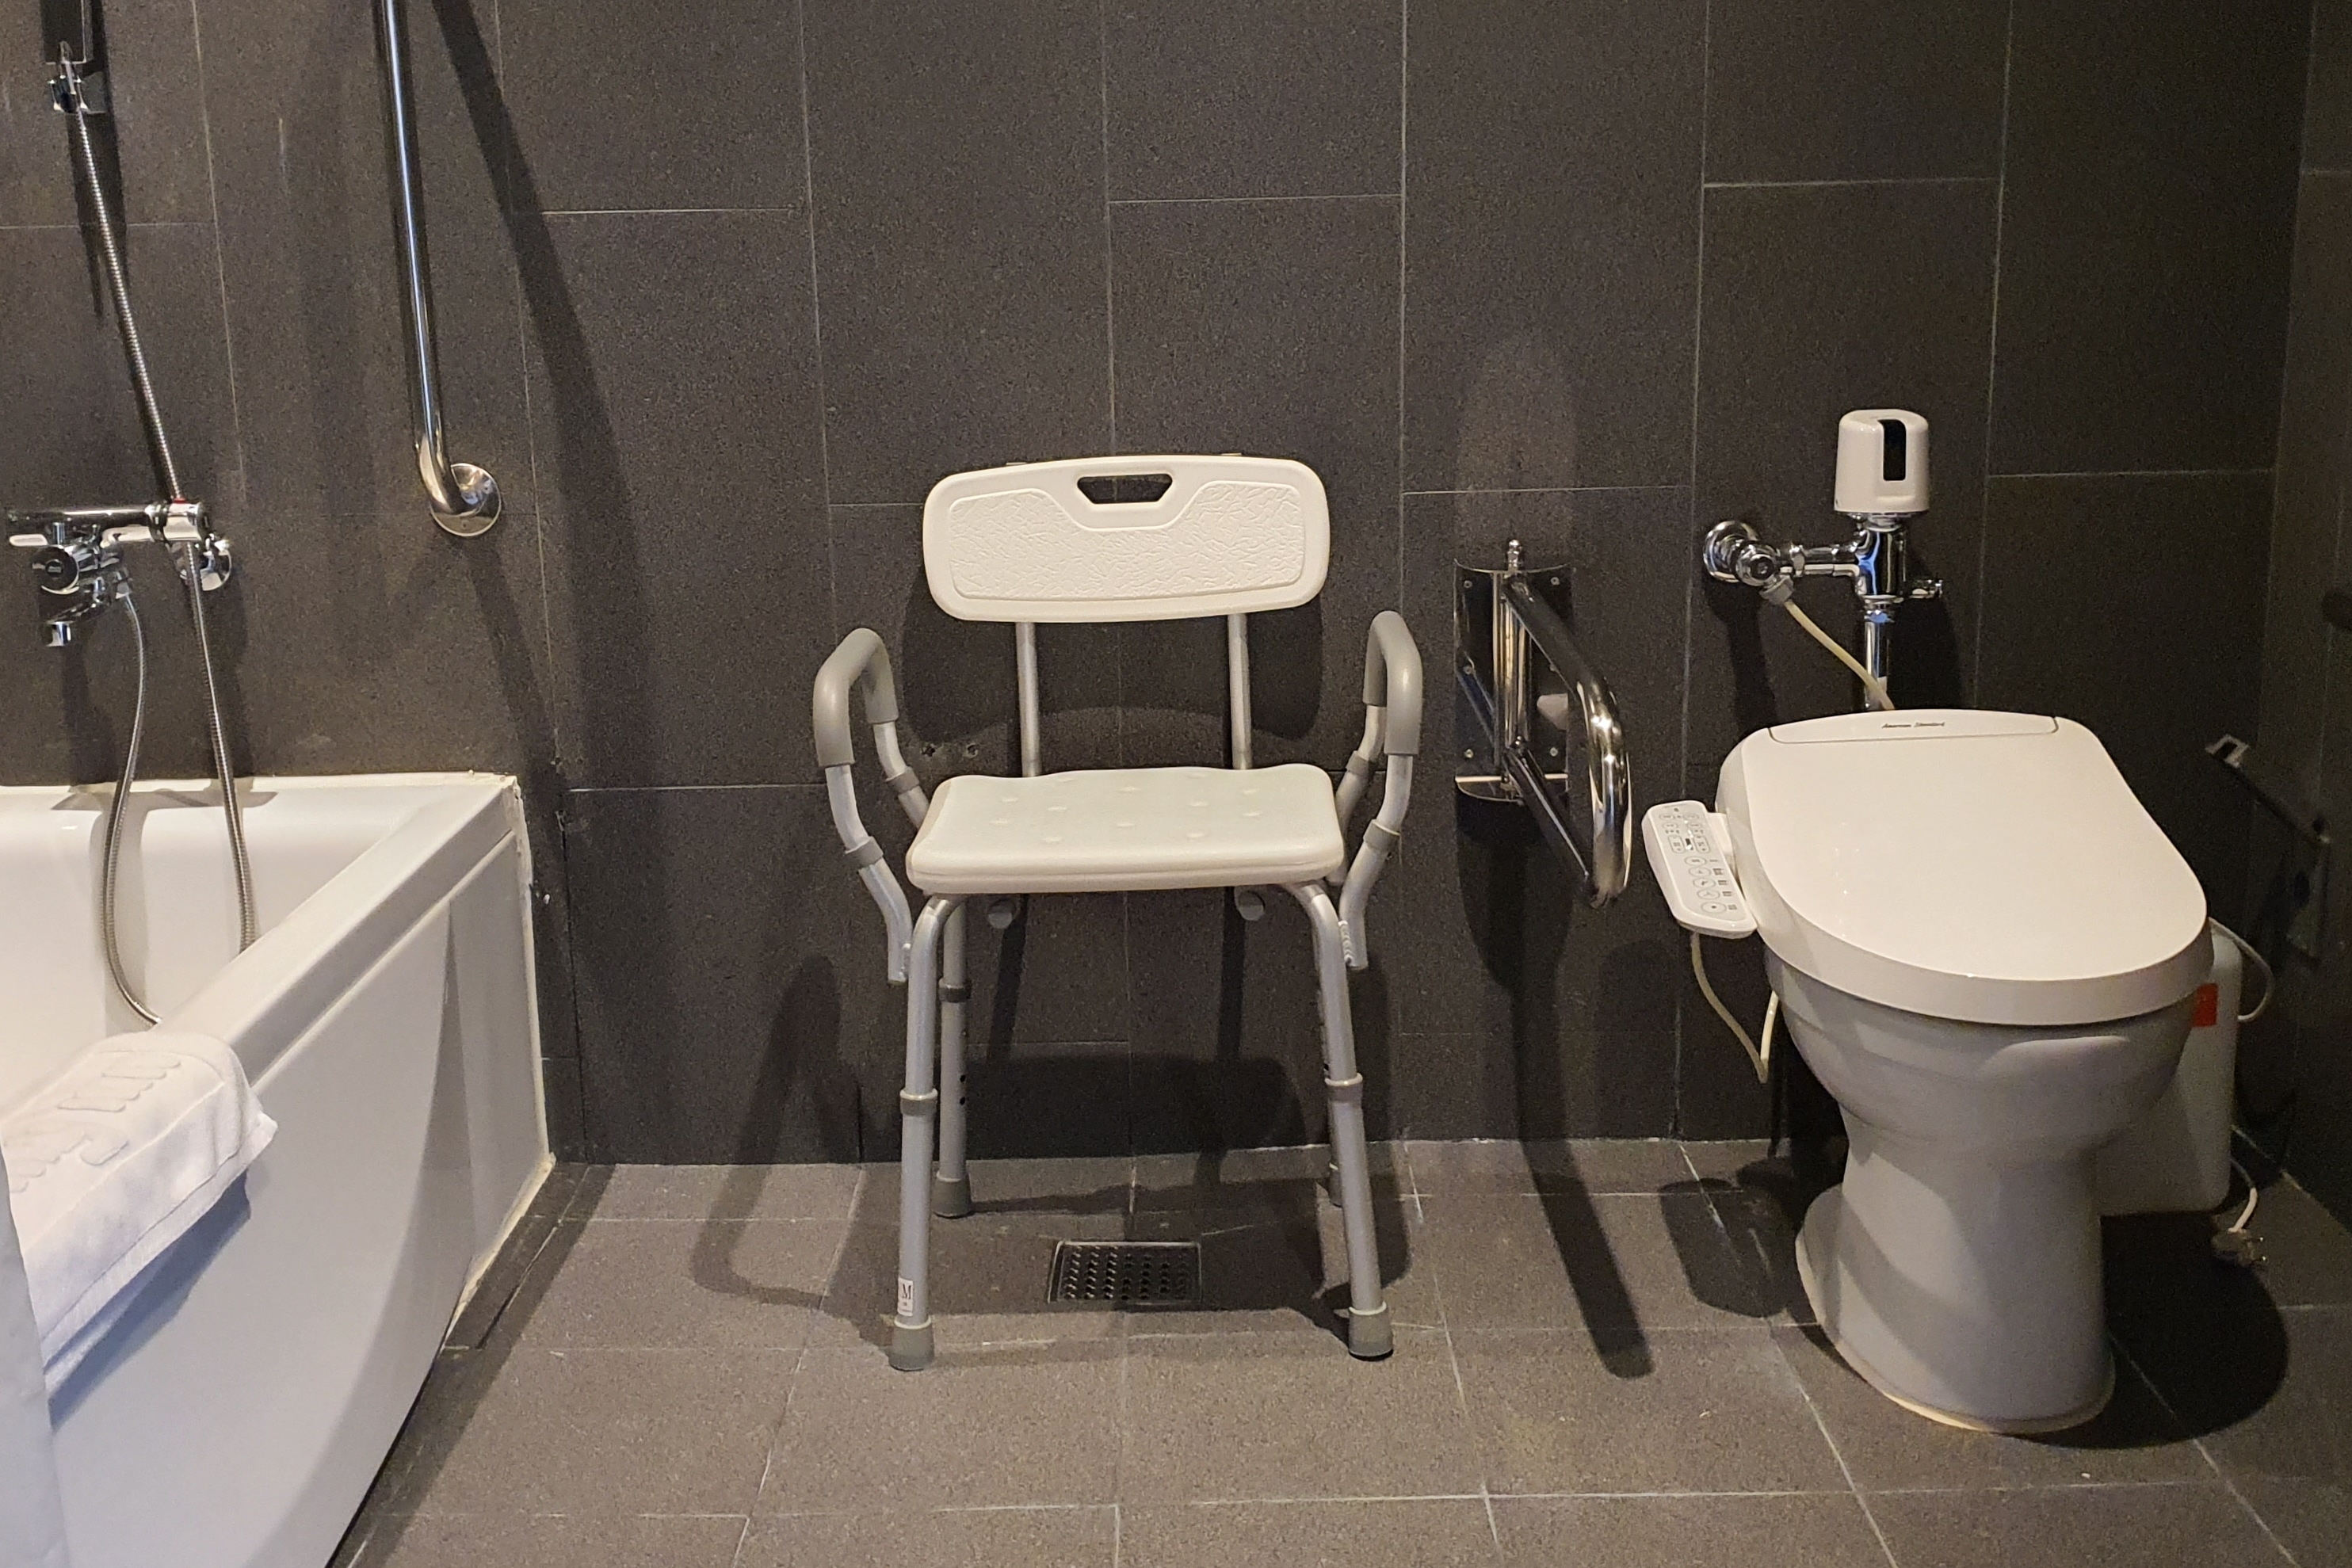 Accessible guesroom bathroom0 : Shower chairs in the bathroom 